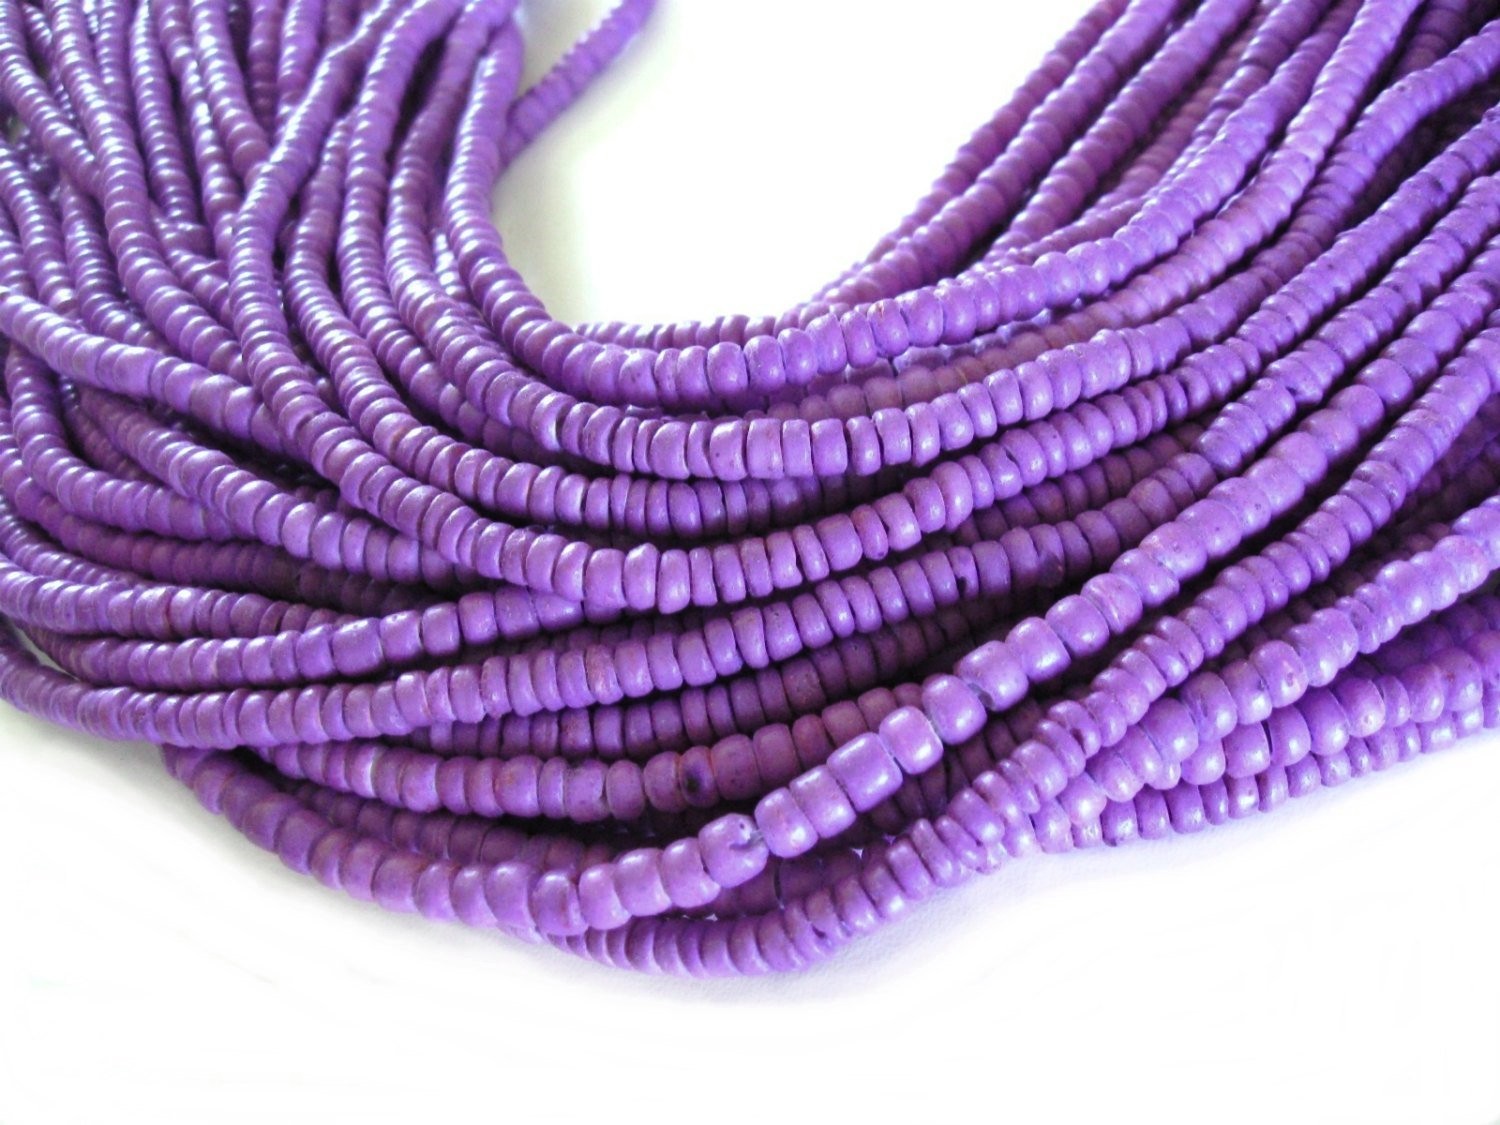 Coconut bead 150 lilac wood Beads - Coconut Rondelle Disk Beads 4-5mm